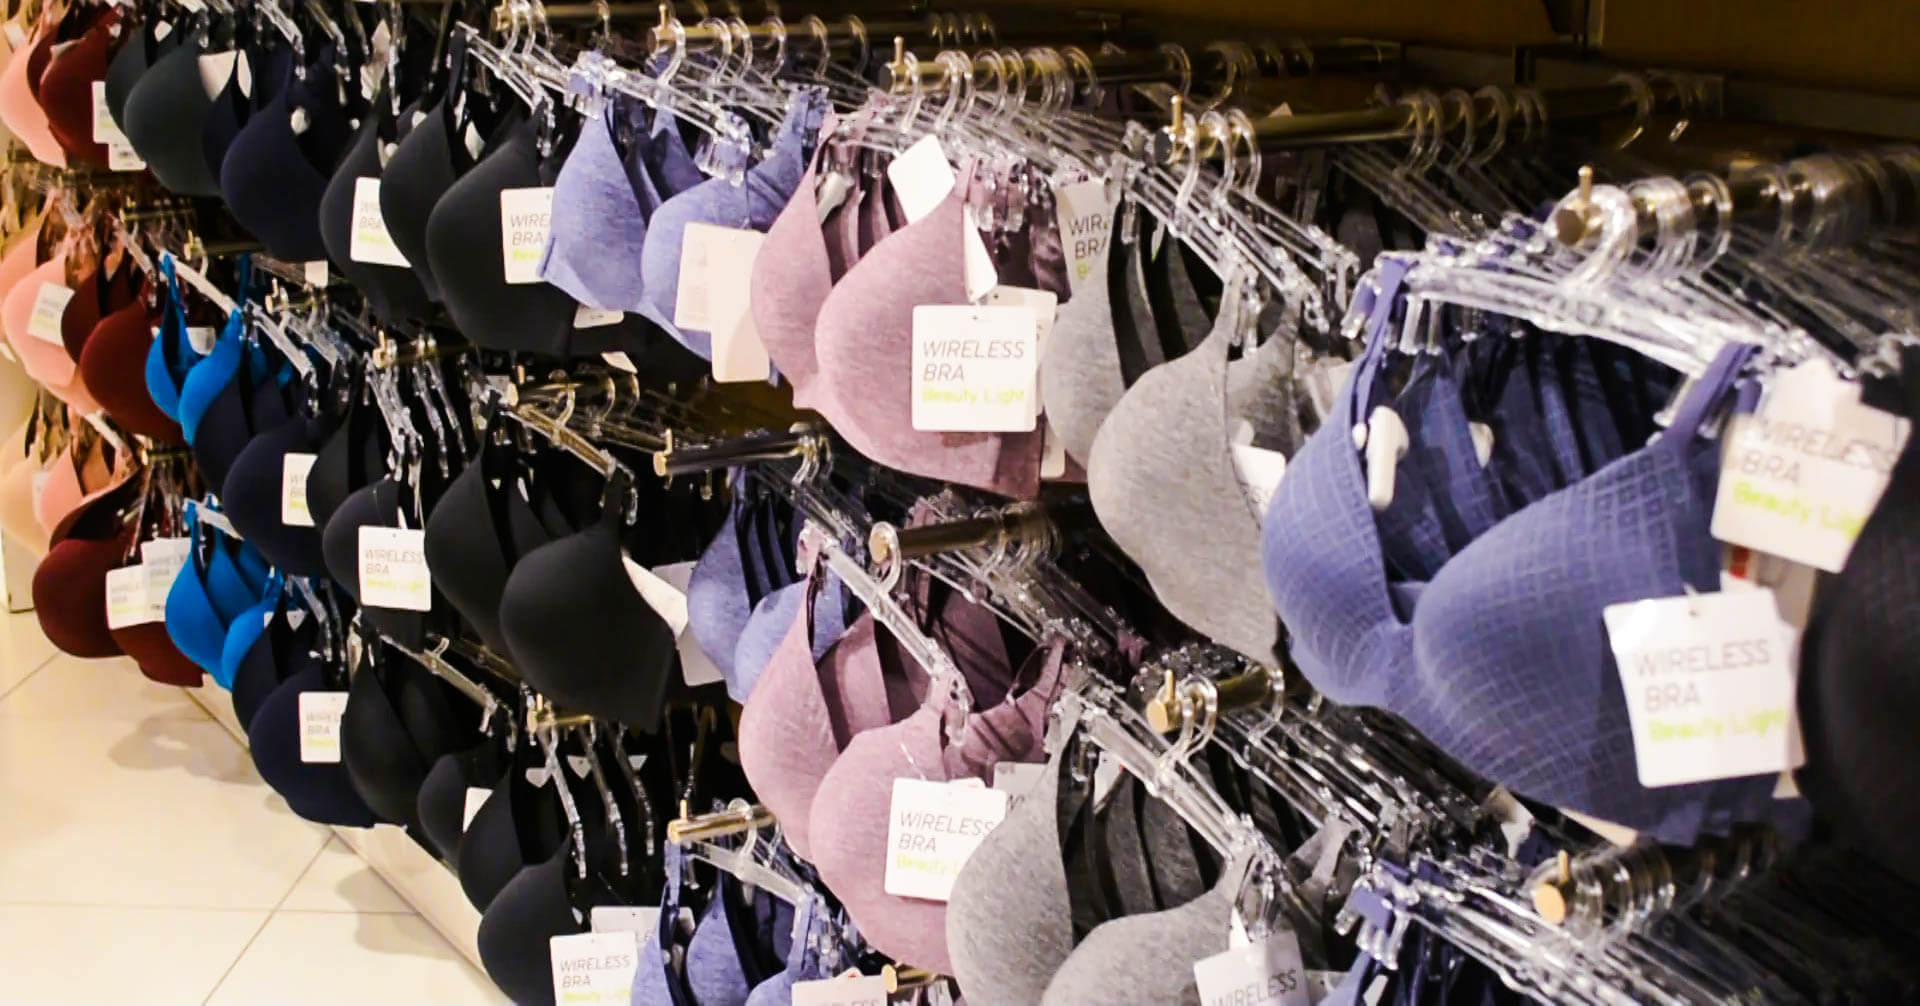 Wireless bra has become a popular innerwear choice over the years, with soft molded cups instead of a rigid wire to lift the breasts